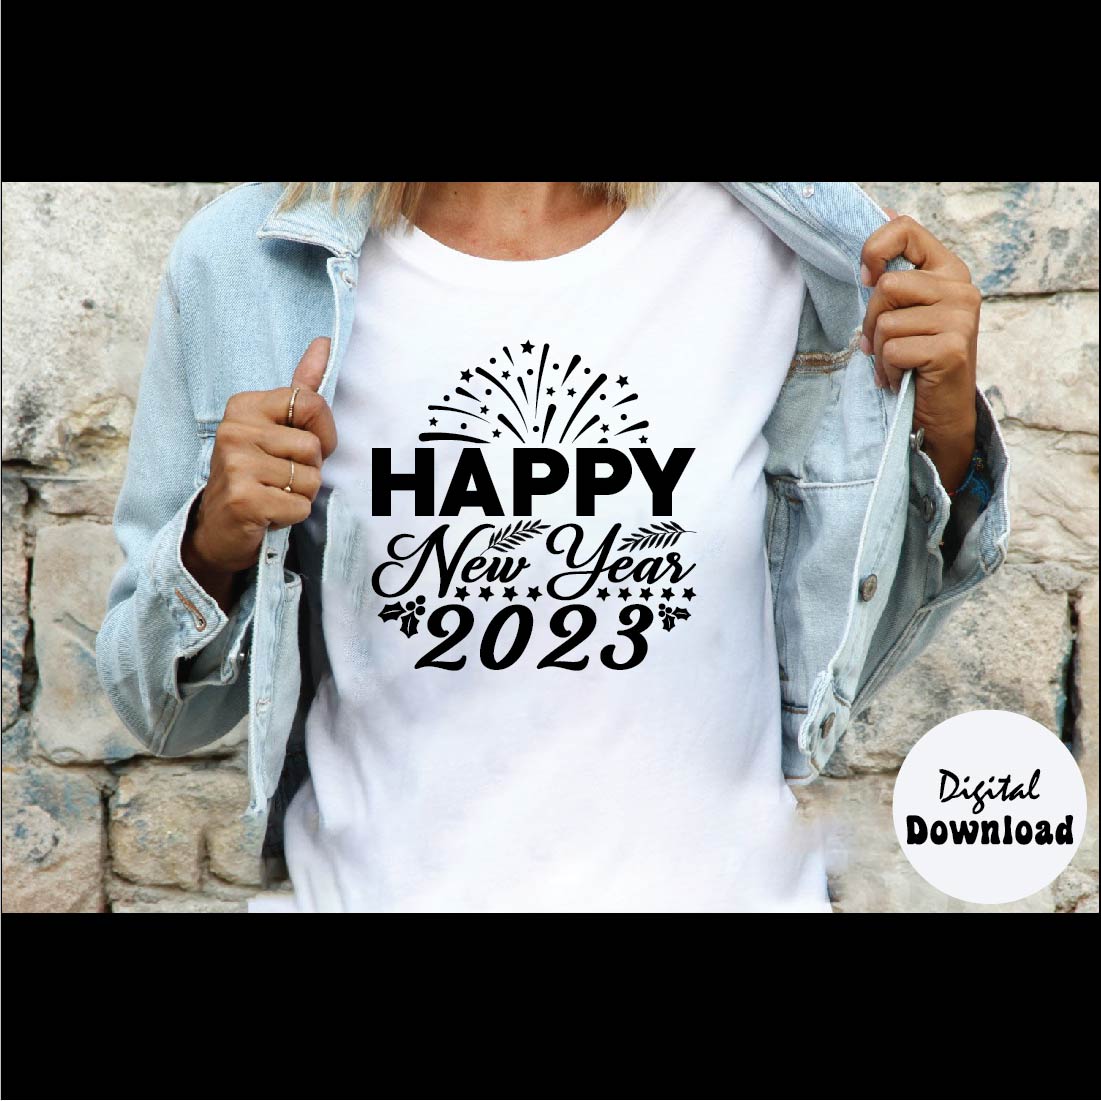 Happy New Year Svg Bundle cover image.